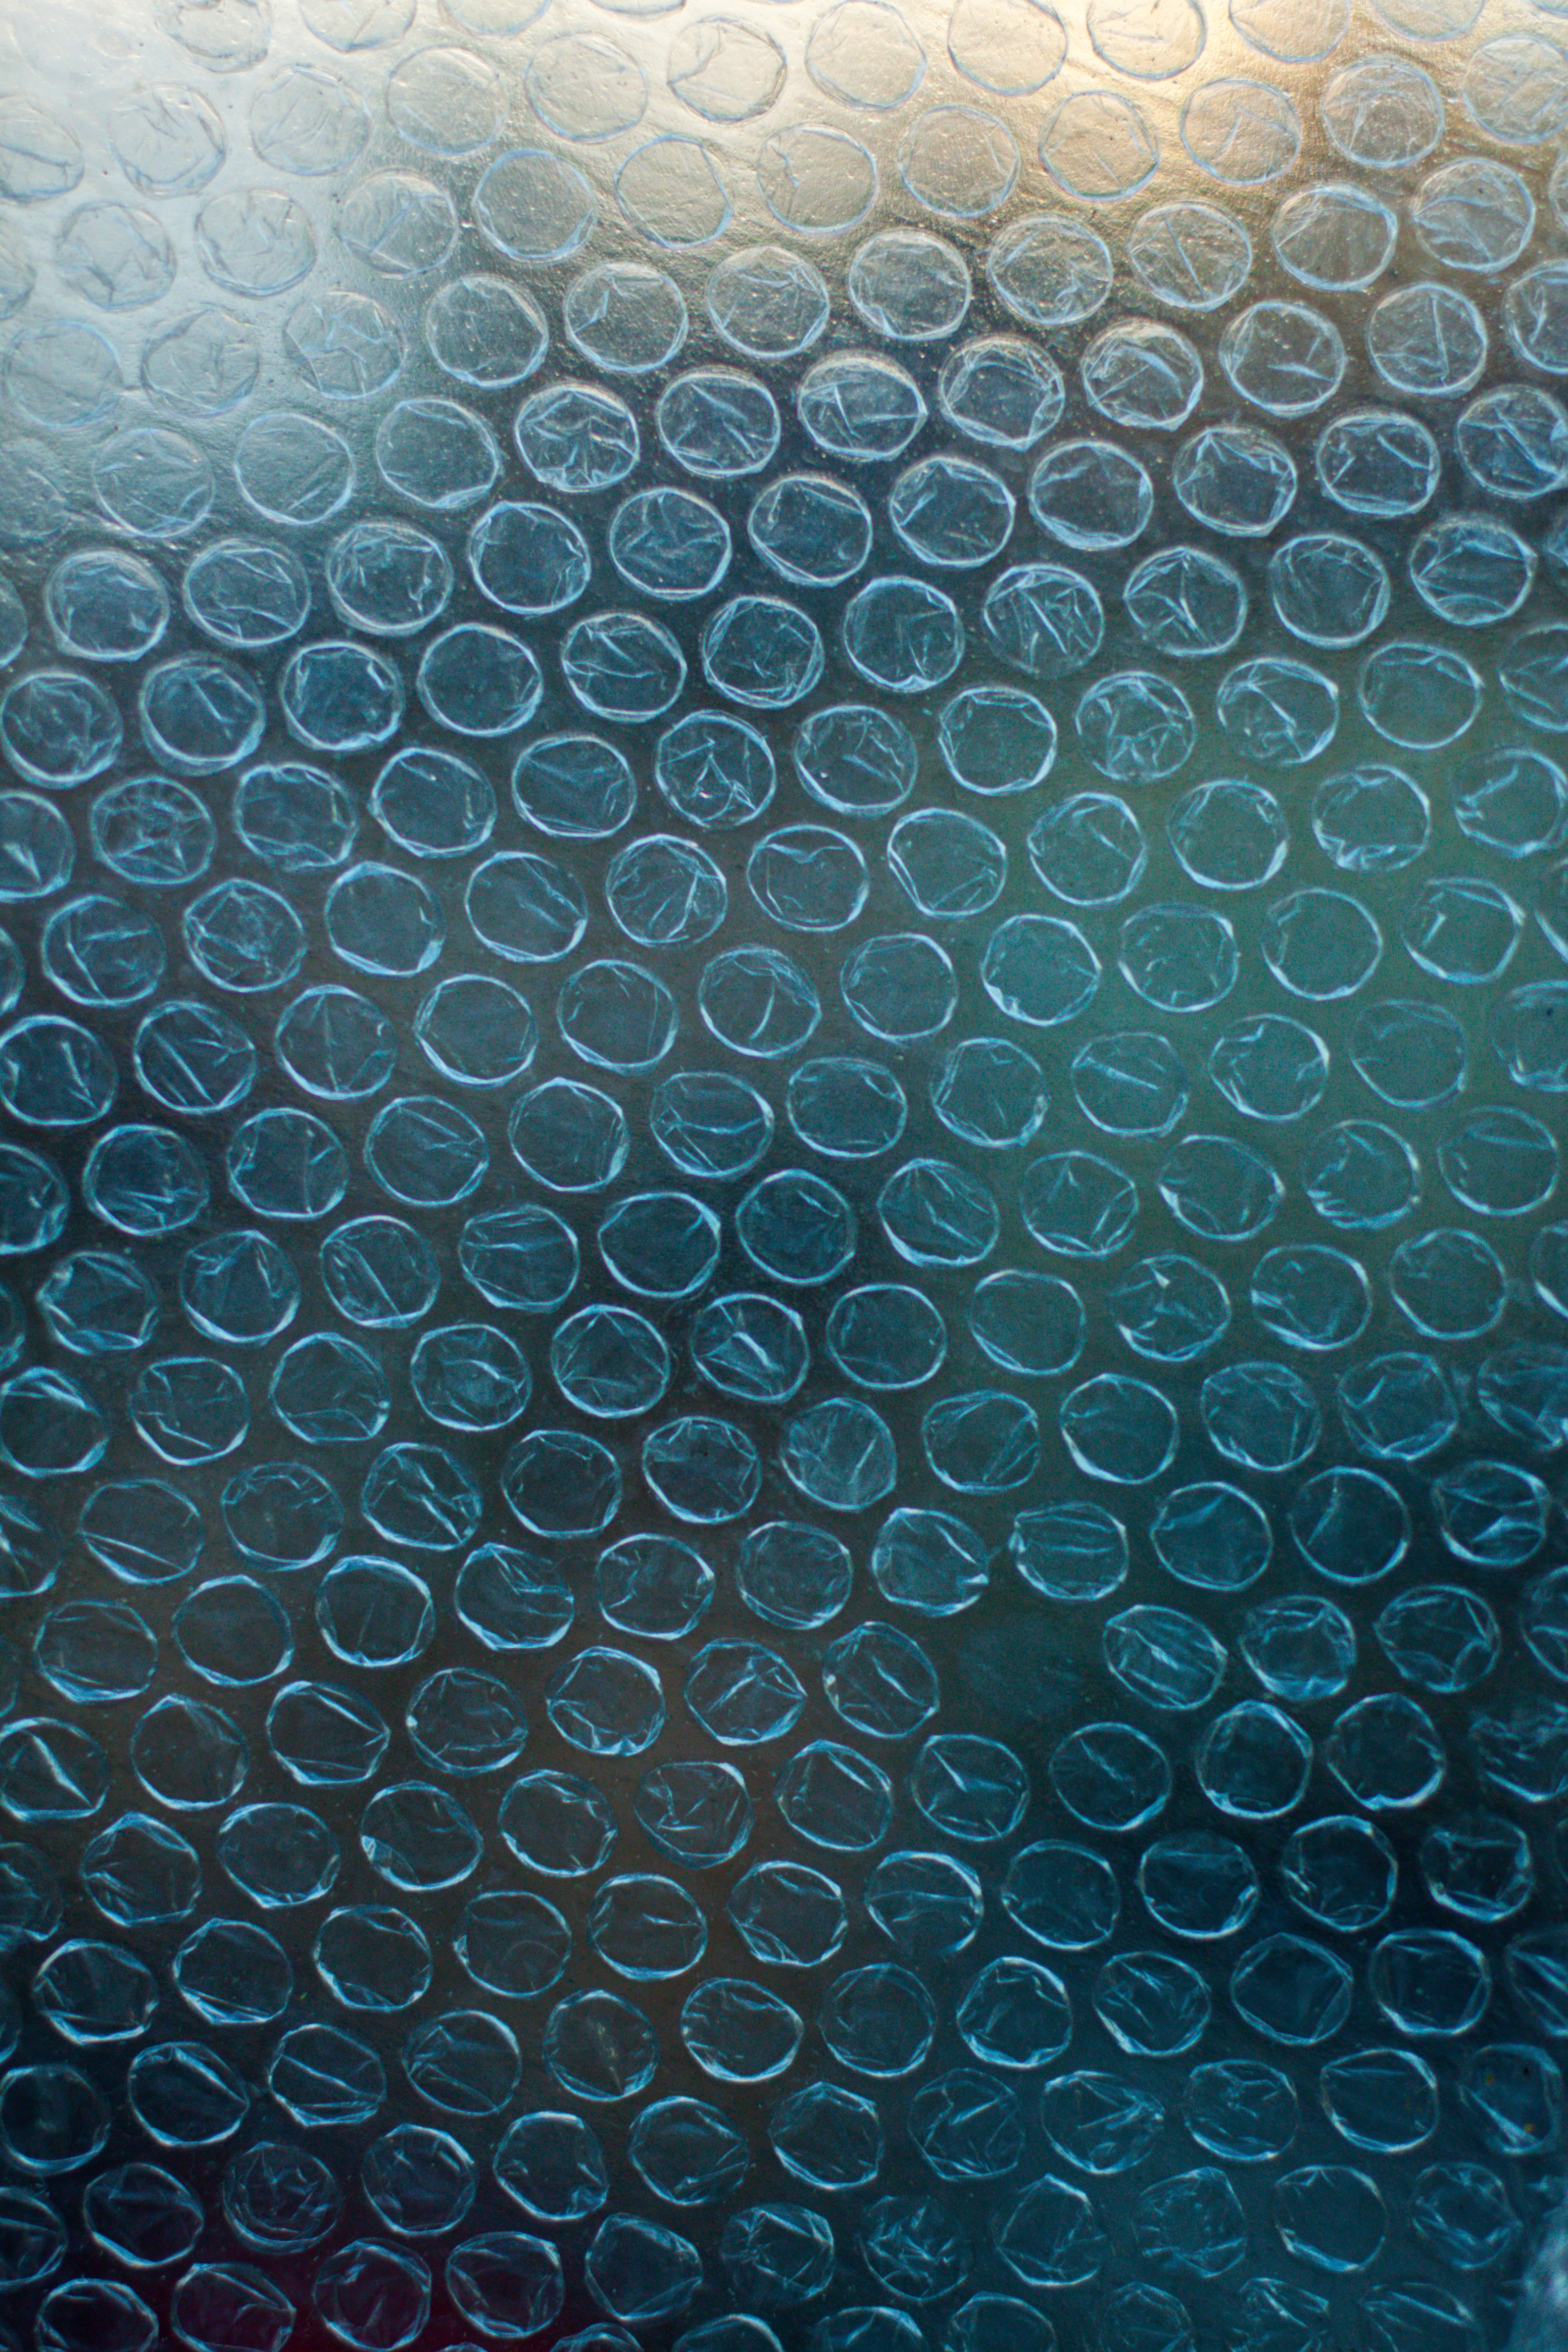 bubbles, circles, texture, textures, surface, package, packet